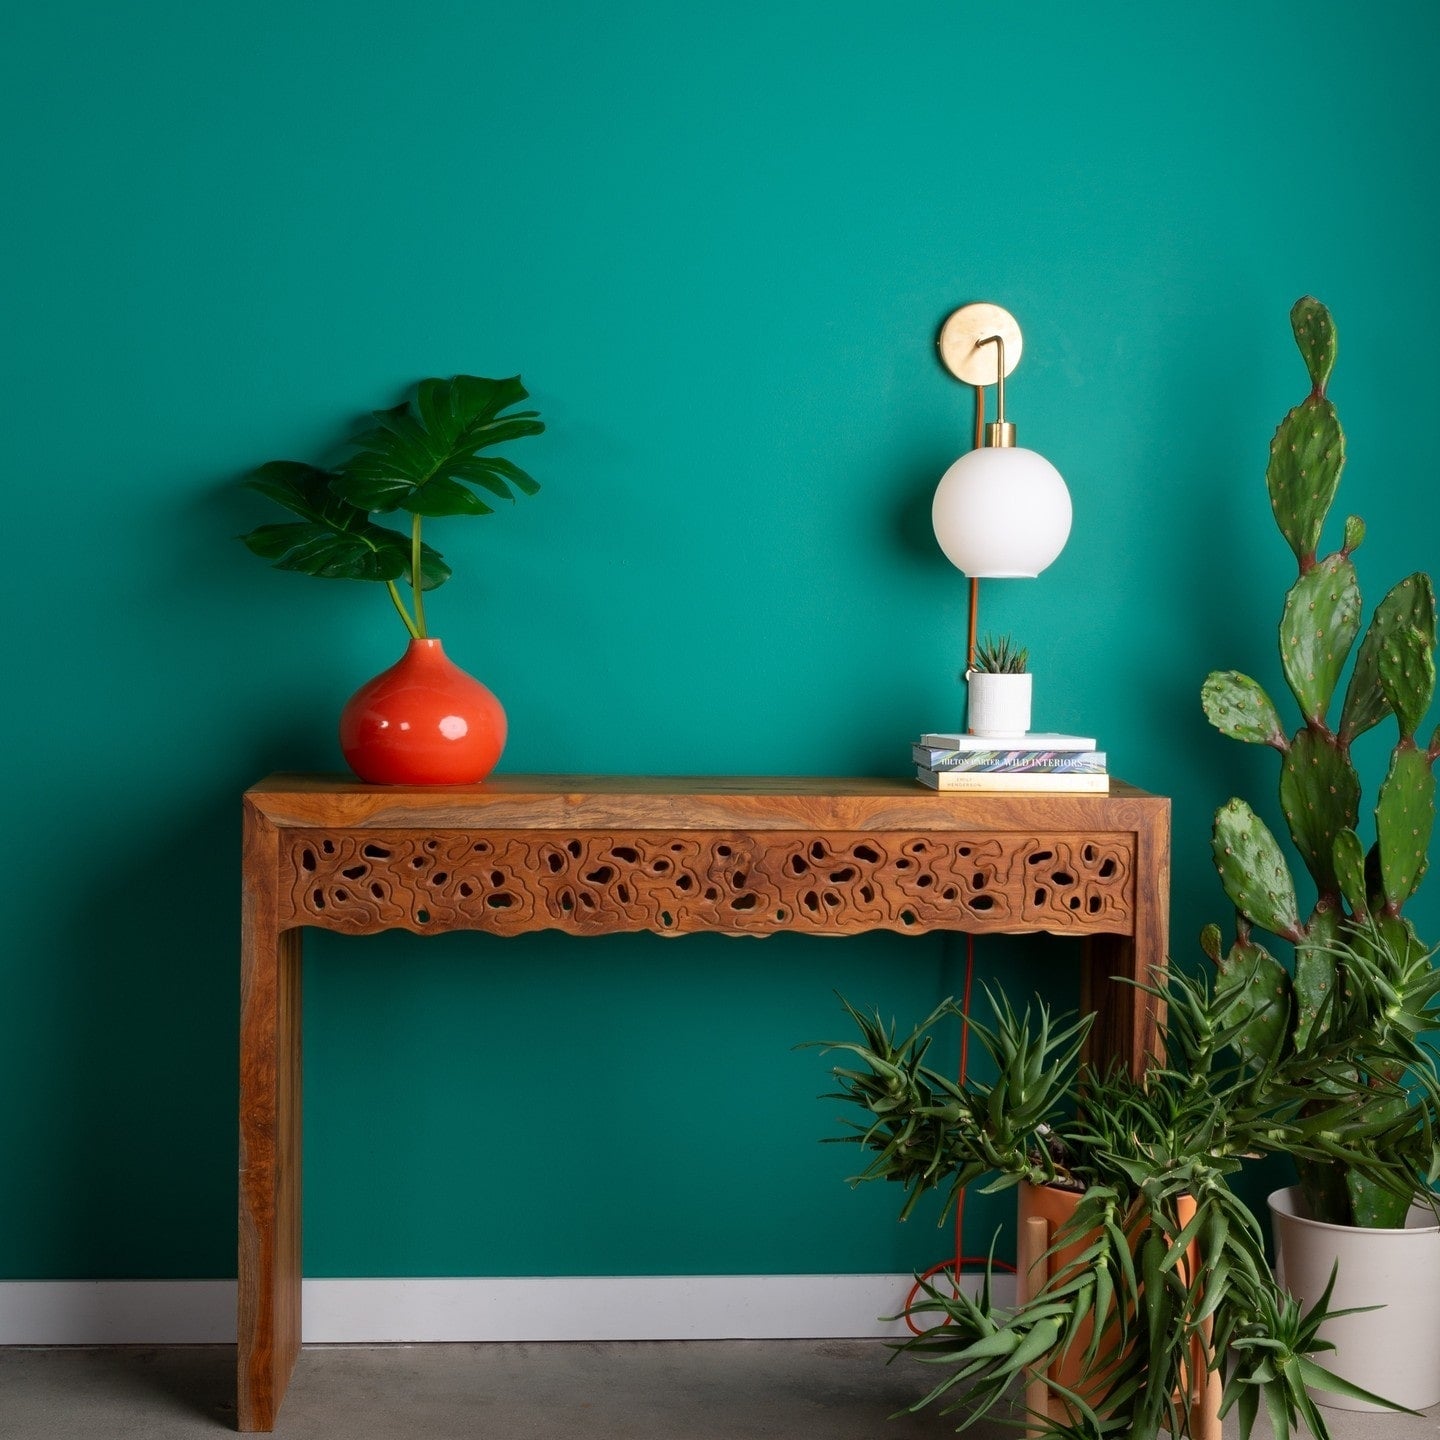 Color Cord globe wall sconce with red cord on a blue-green wall and wood sidetable surrounded by plants